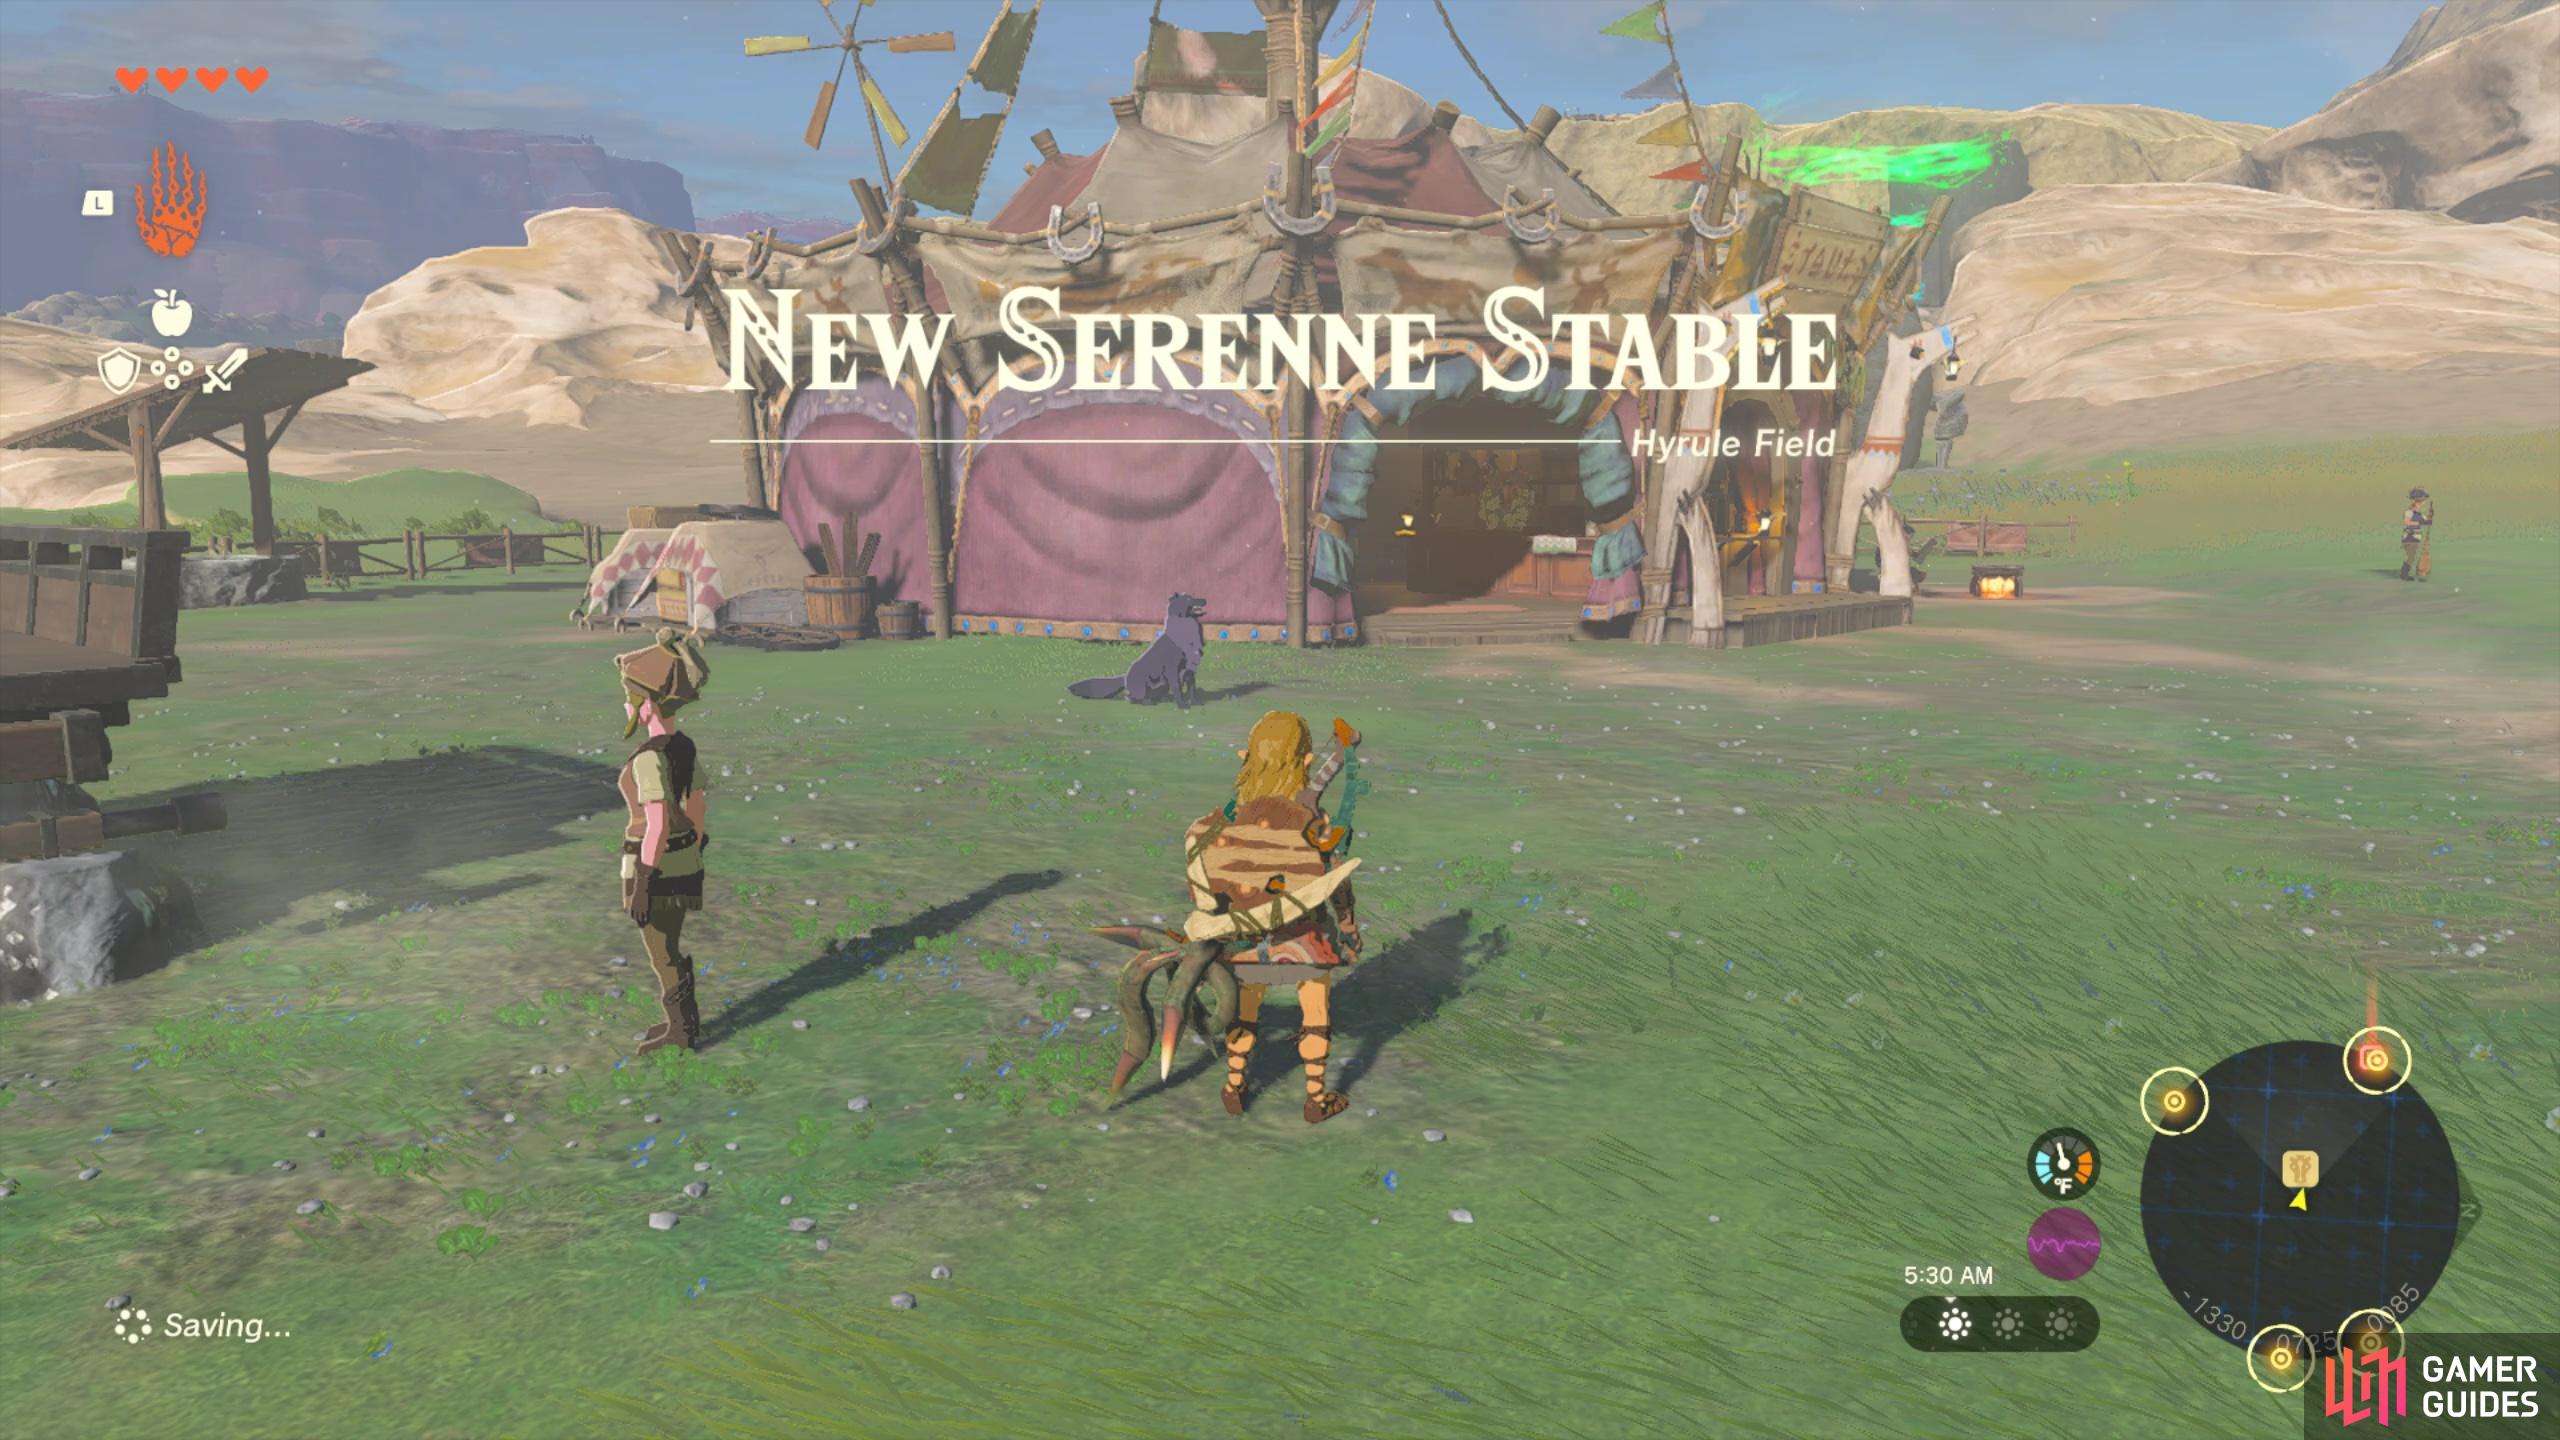 You can unlock Pony Points by visiting a stable for the first time.